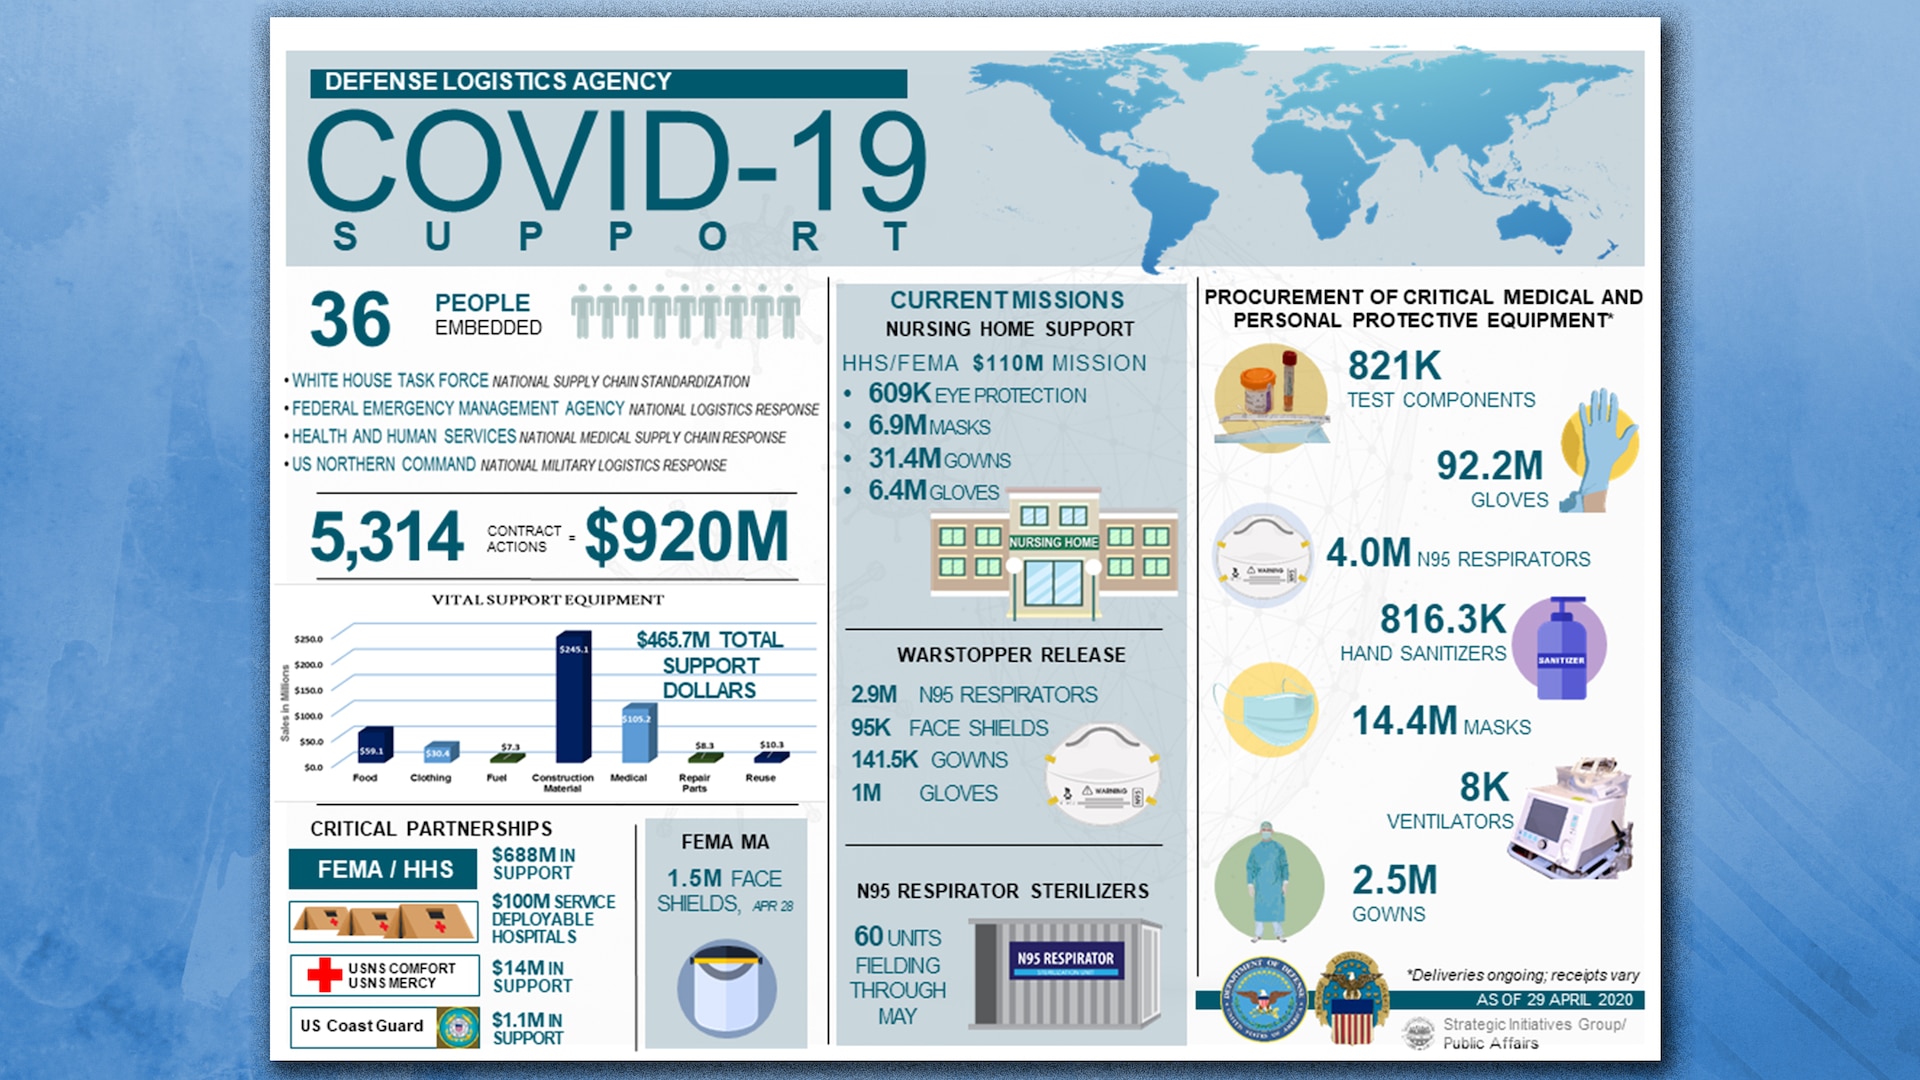 An infographic provides figures representing DLA's support to COVID-19 efforts